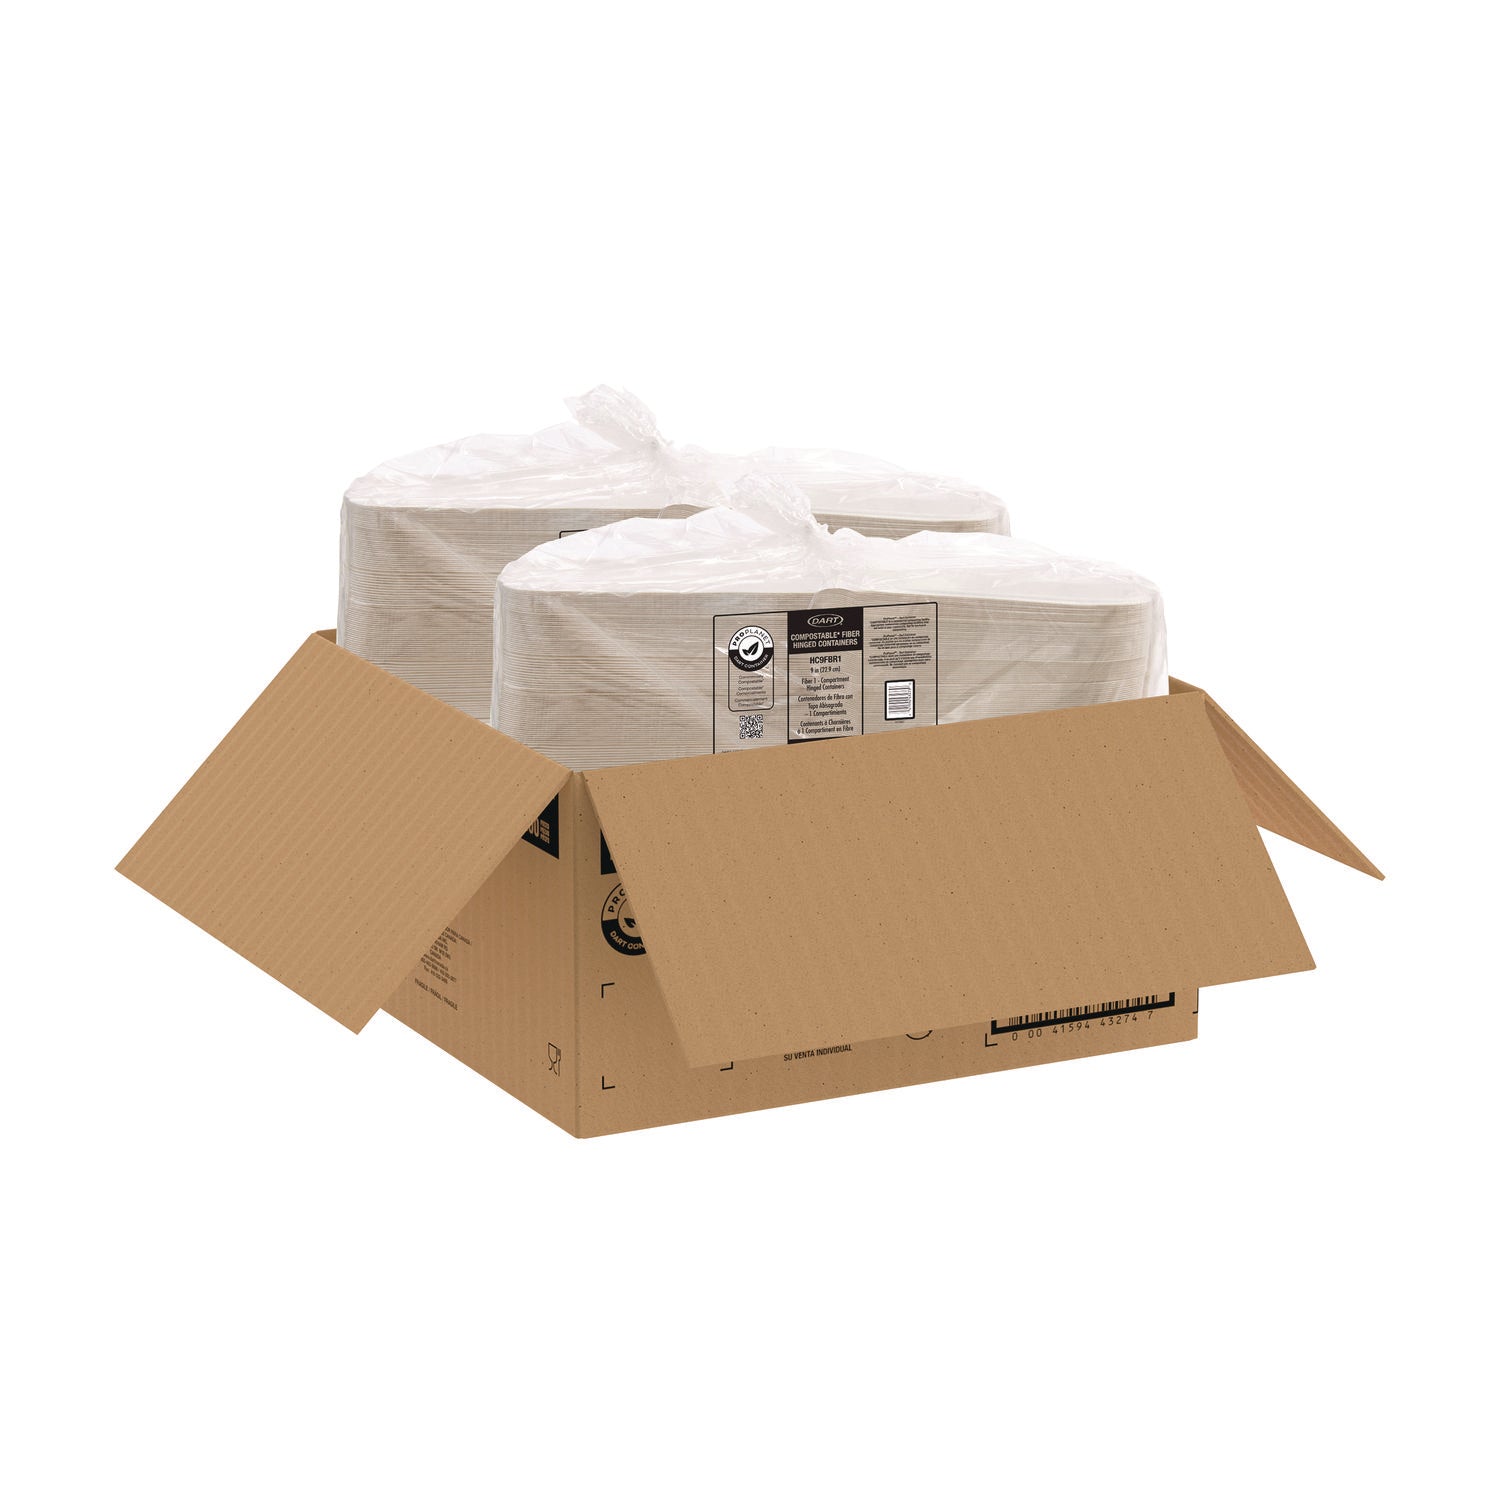 compostable-fiber-hinged-trays-proplanet-seal-898-x-935-x-217-ivory-molded-fiber-200-carton_dcchc9fbr1 - 4